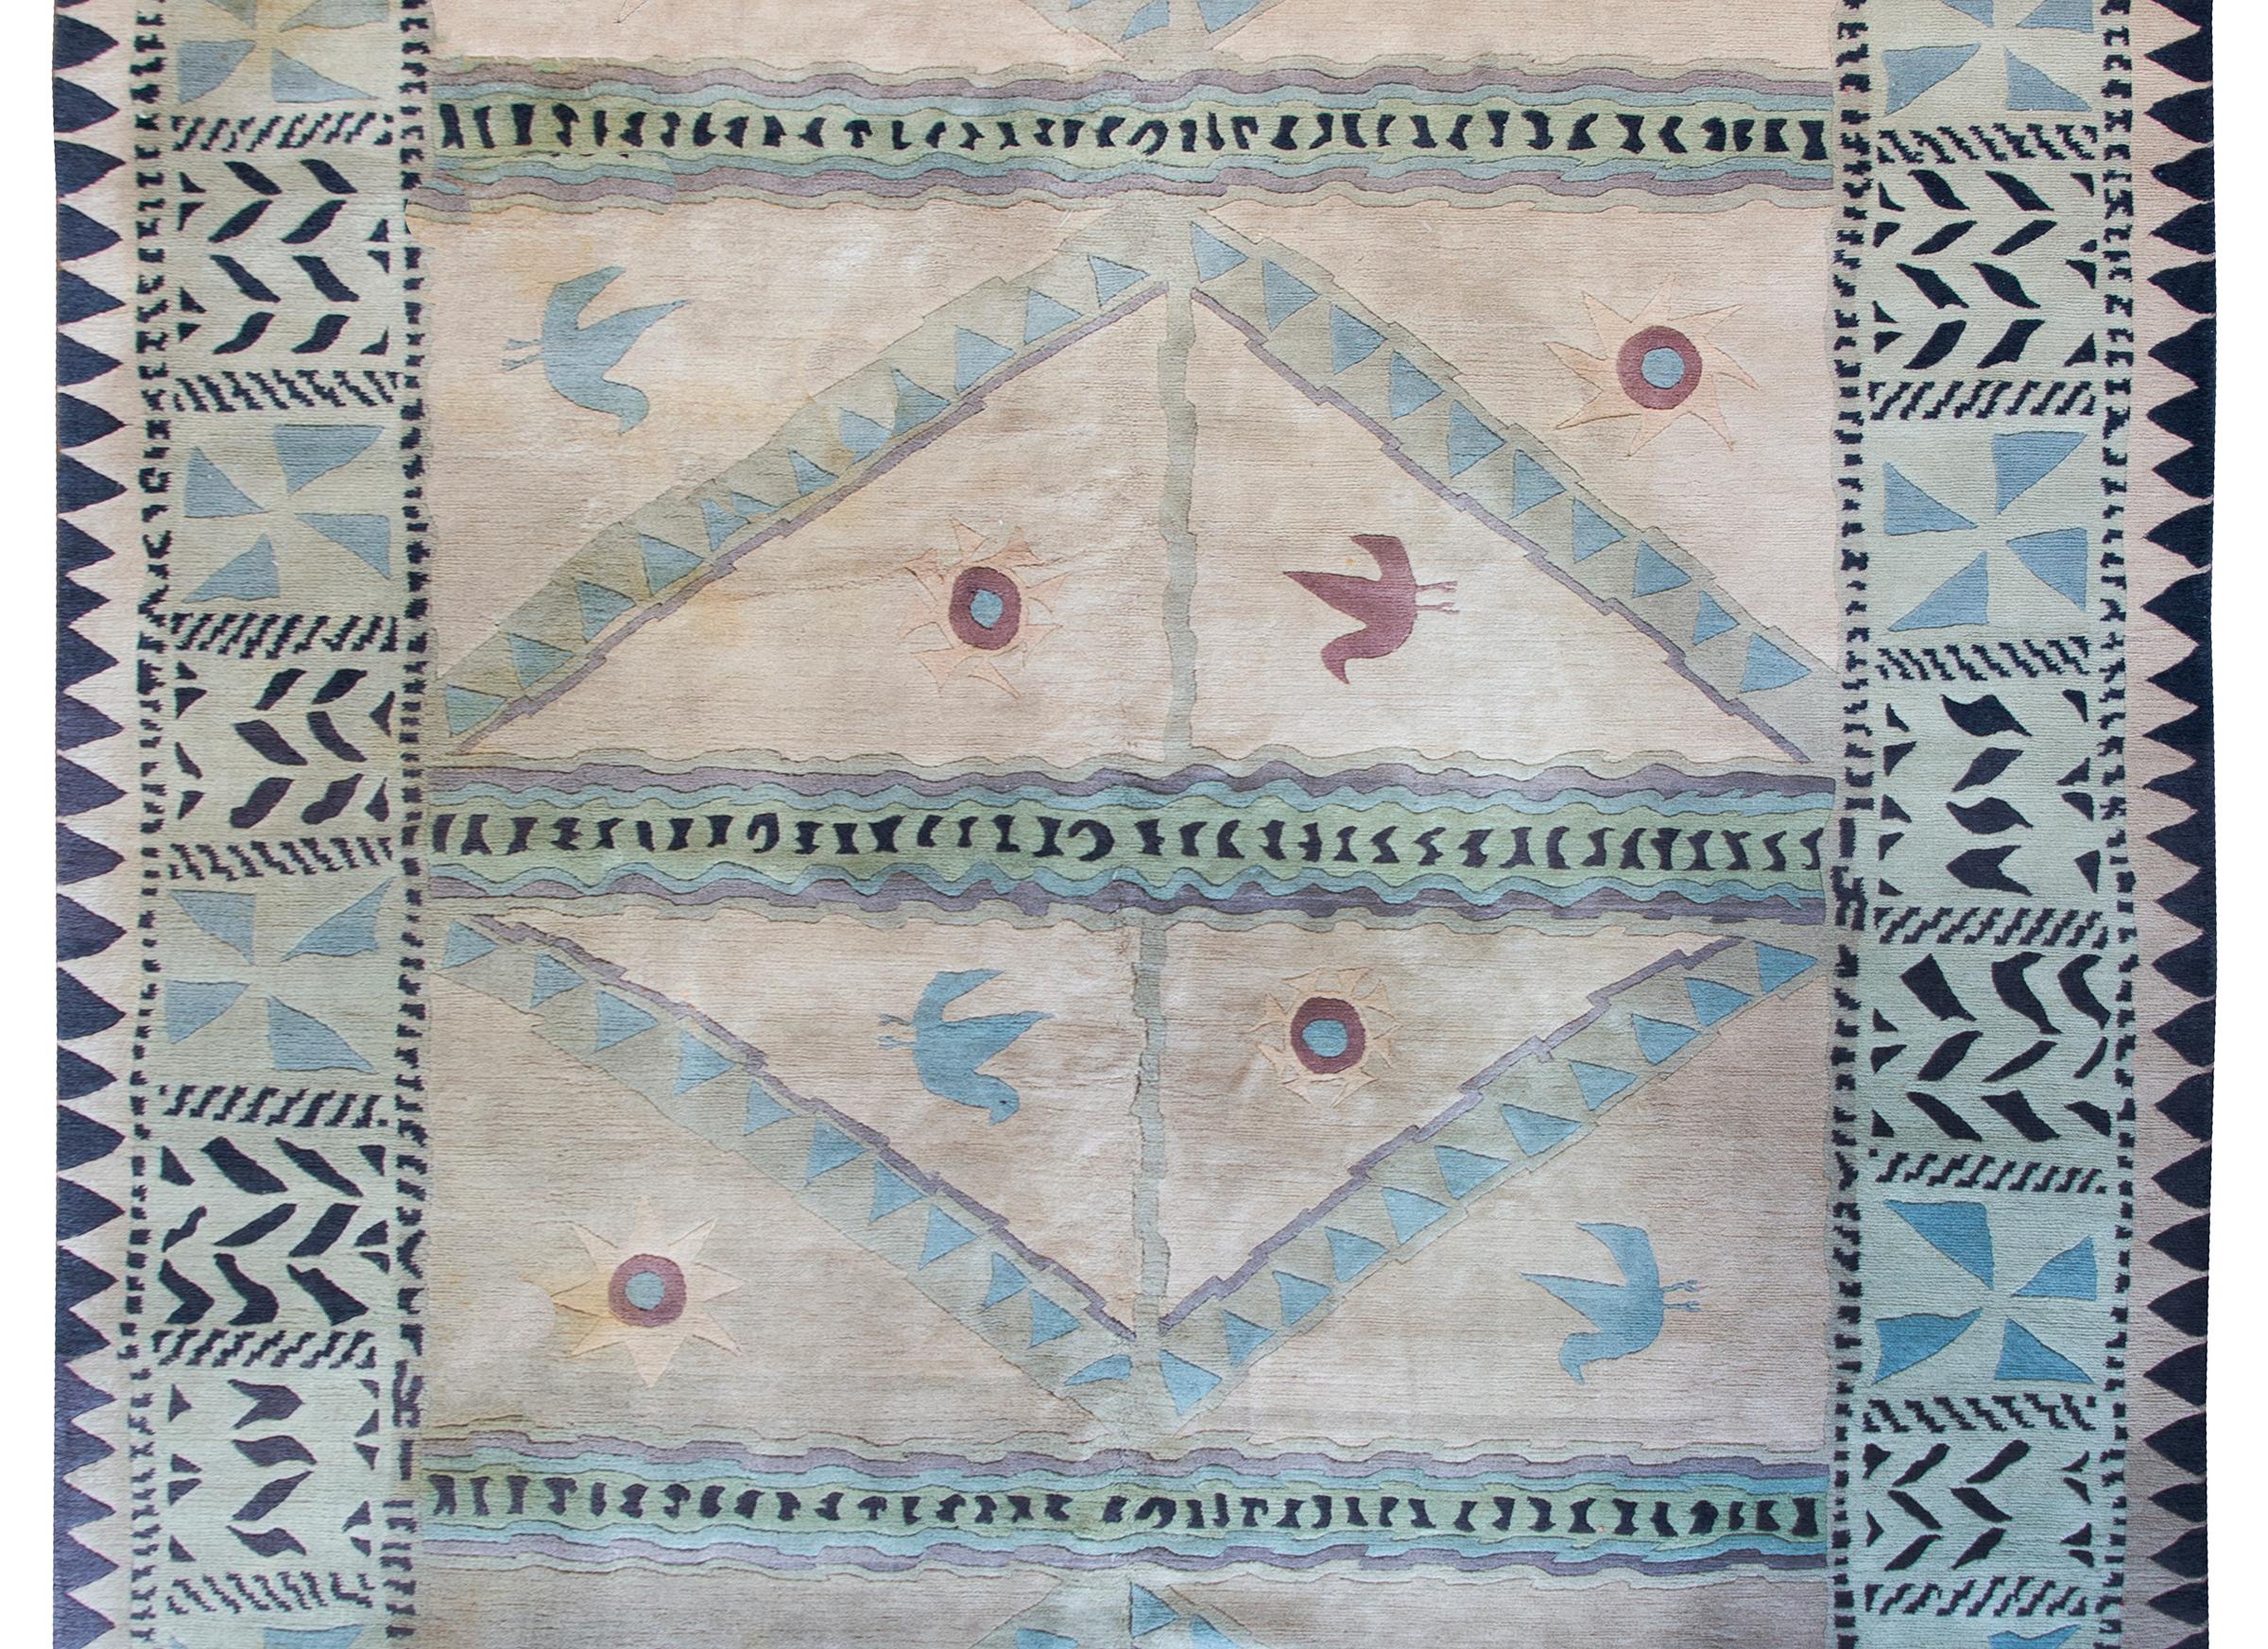 A charming and whimsical late 20th century Tibetan rug with with a highly stylized pattern with birds, suns, geometric and tiger stripes, and all woven in light blue, green, yellow, mauve, and black hand knotted wood.